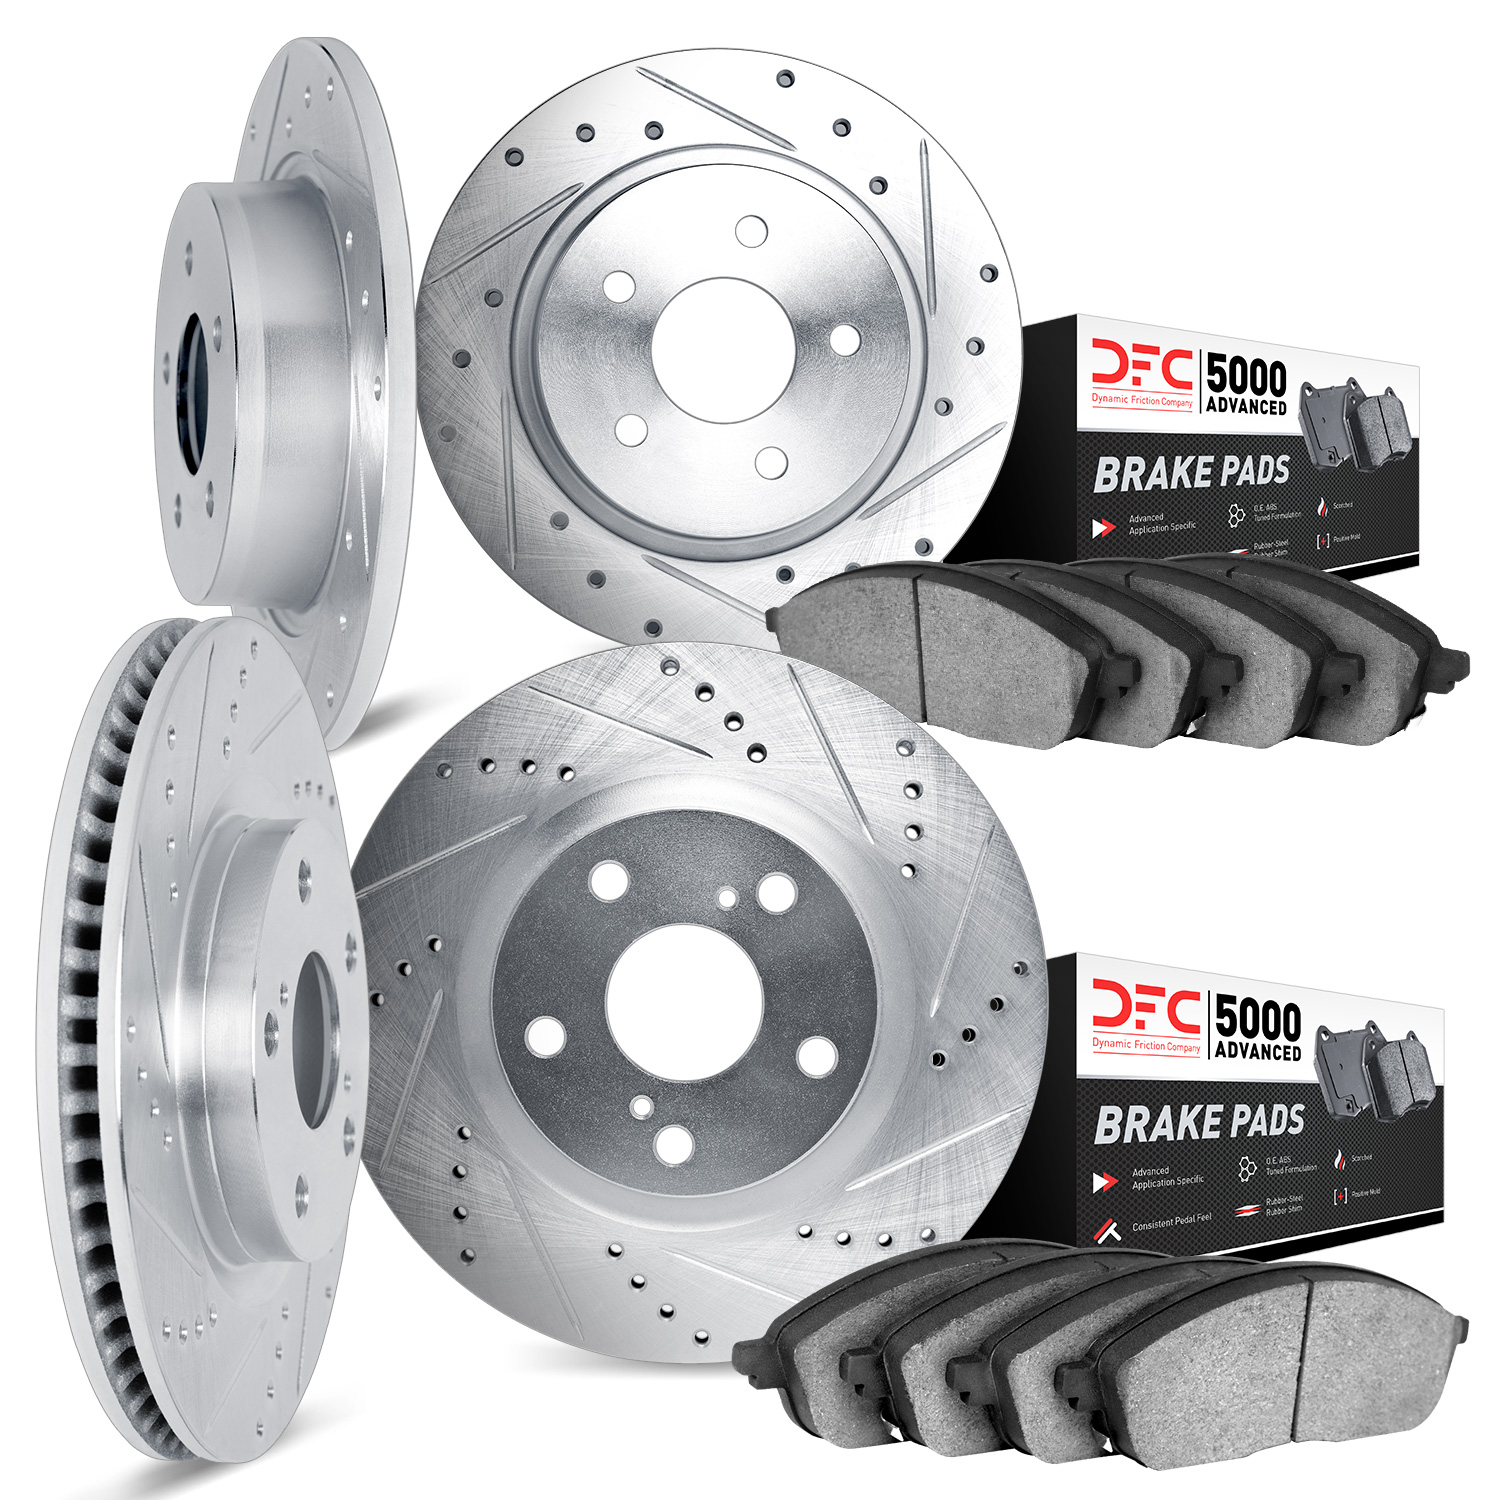 7504-39037 Drilled/Slotted Brake Rotors w/5000 Advanced Brake Pads Kit [Silver], 2004-2008 Mopar, Position: Front and Rear